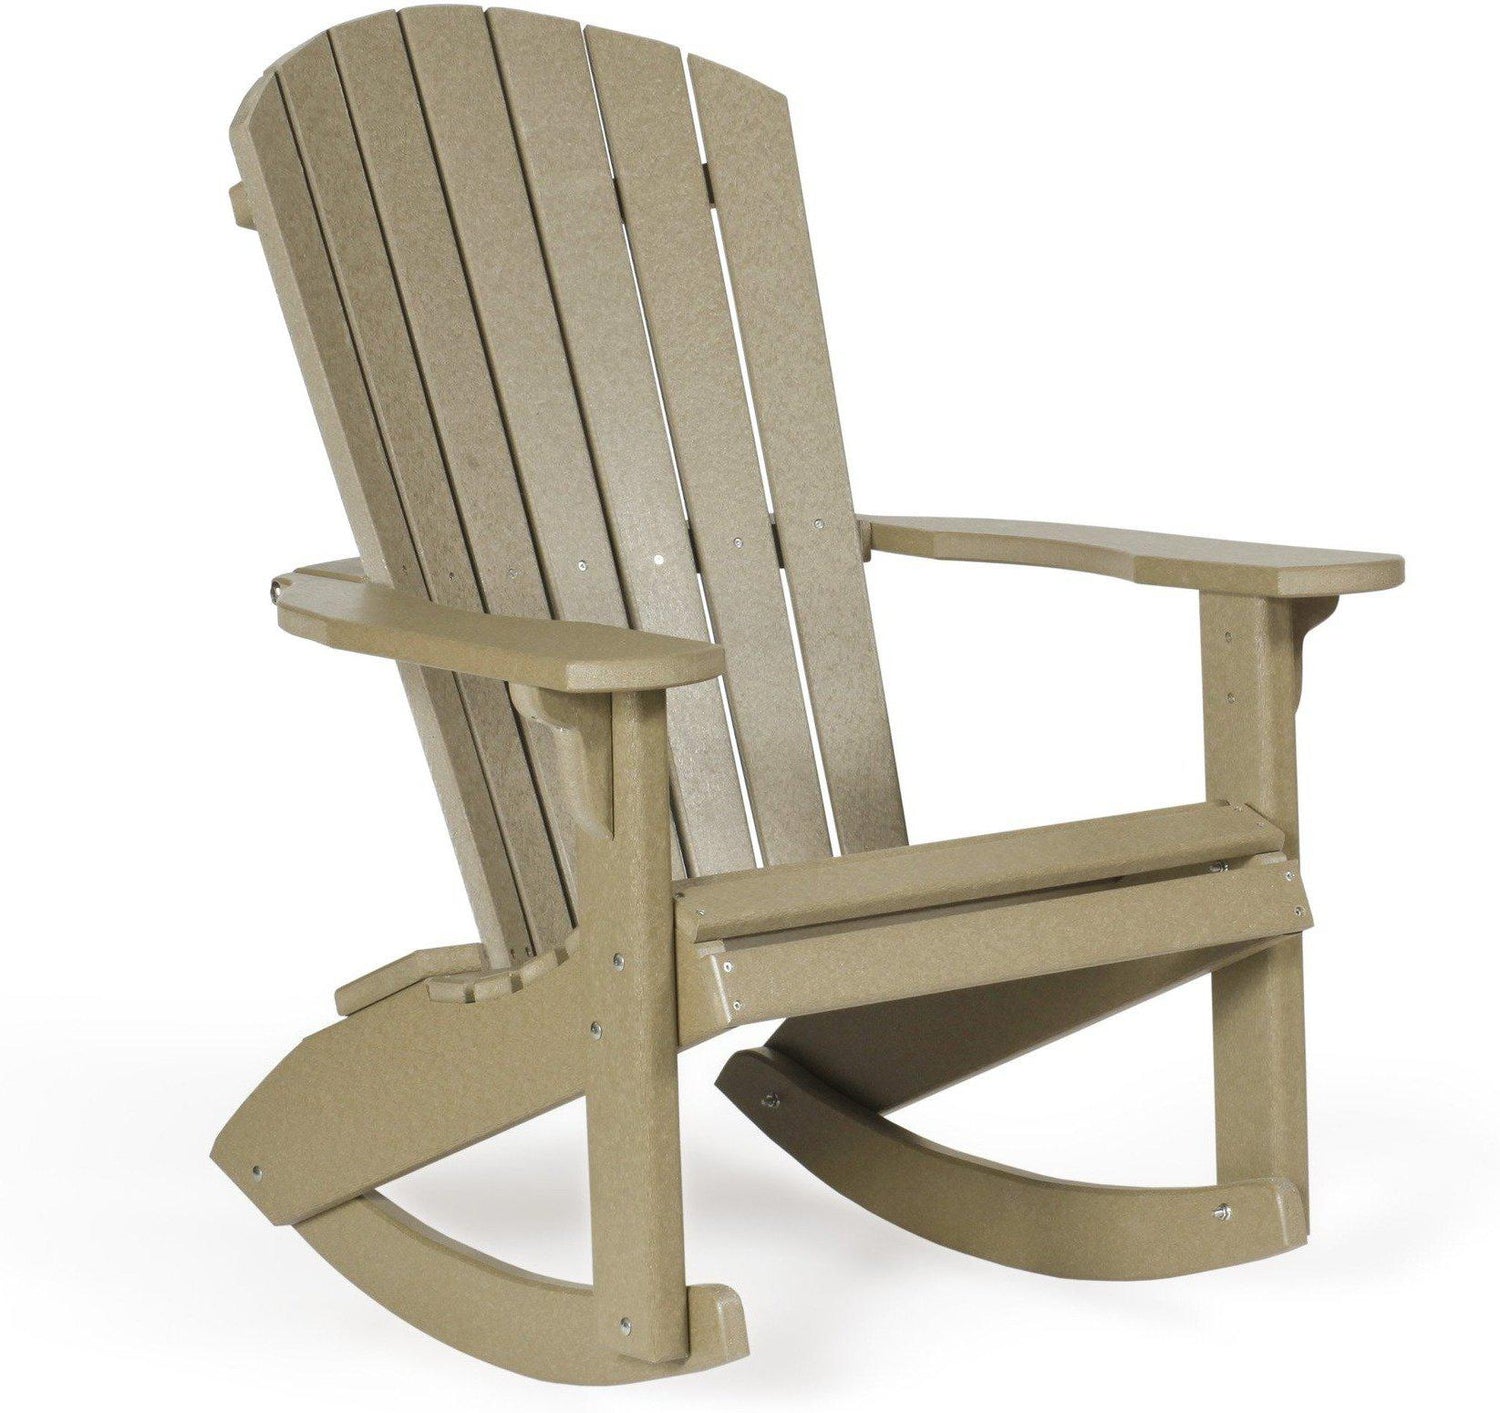 Leisure Lawns Rocking Chair Collection